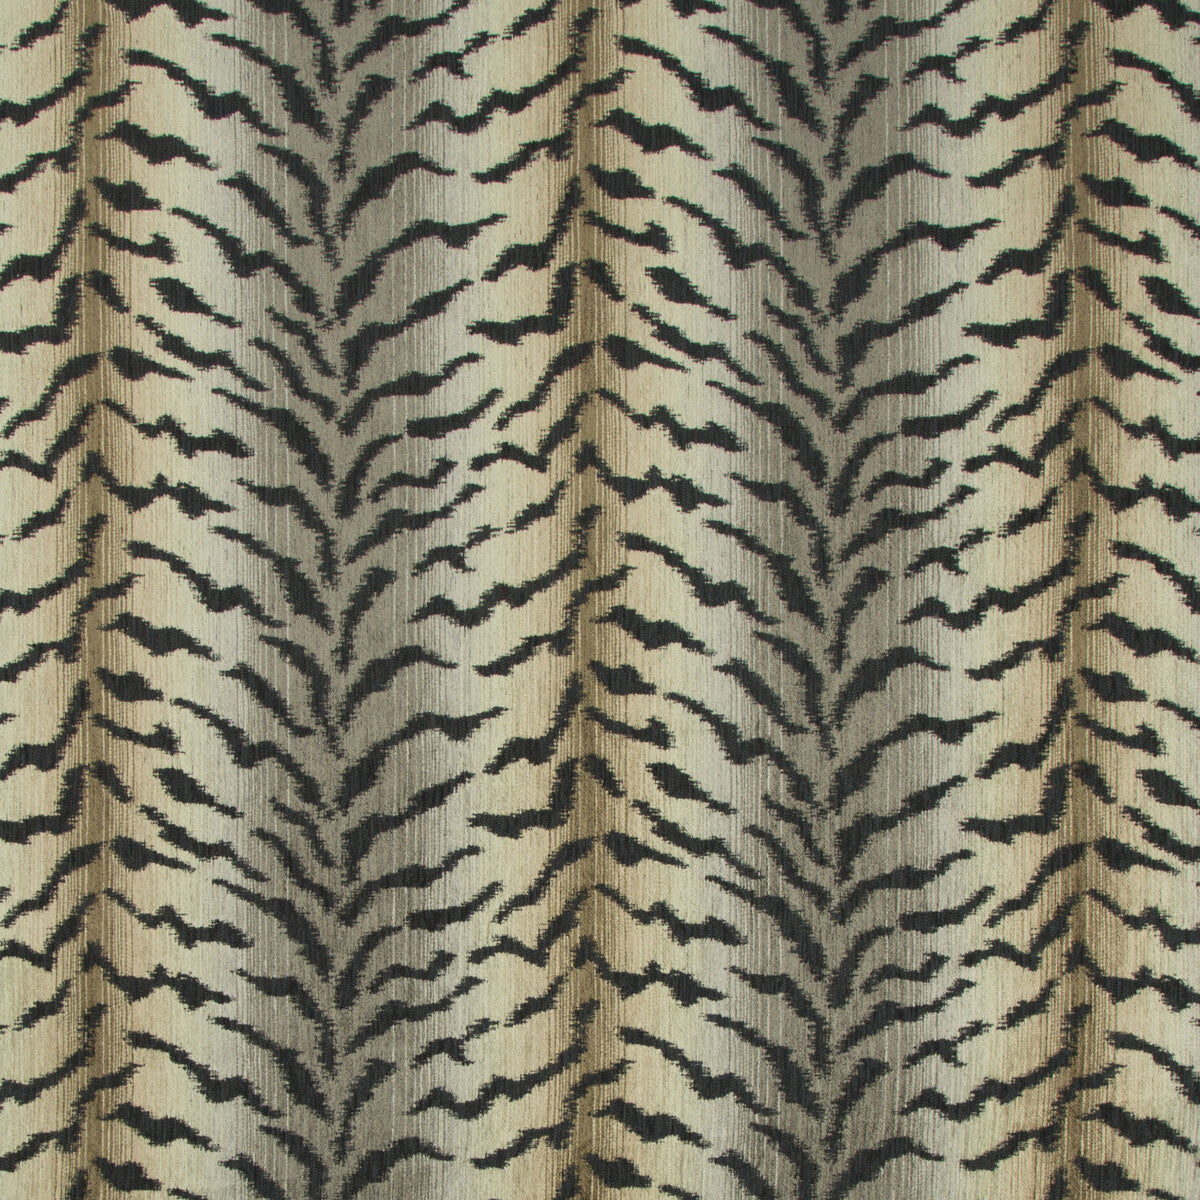 Kravet Design fabric in 35010-1611 color - pattern 35010.1611.0 - by Kravet Design in the Performance Crypton Home collection